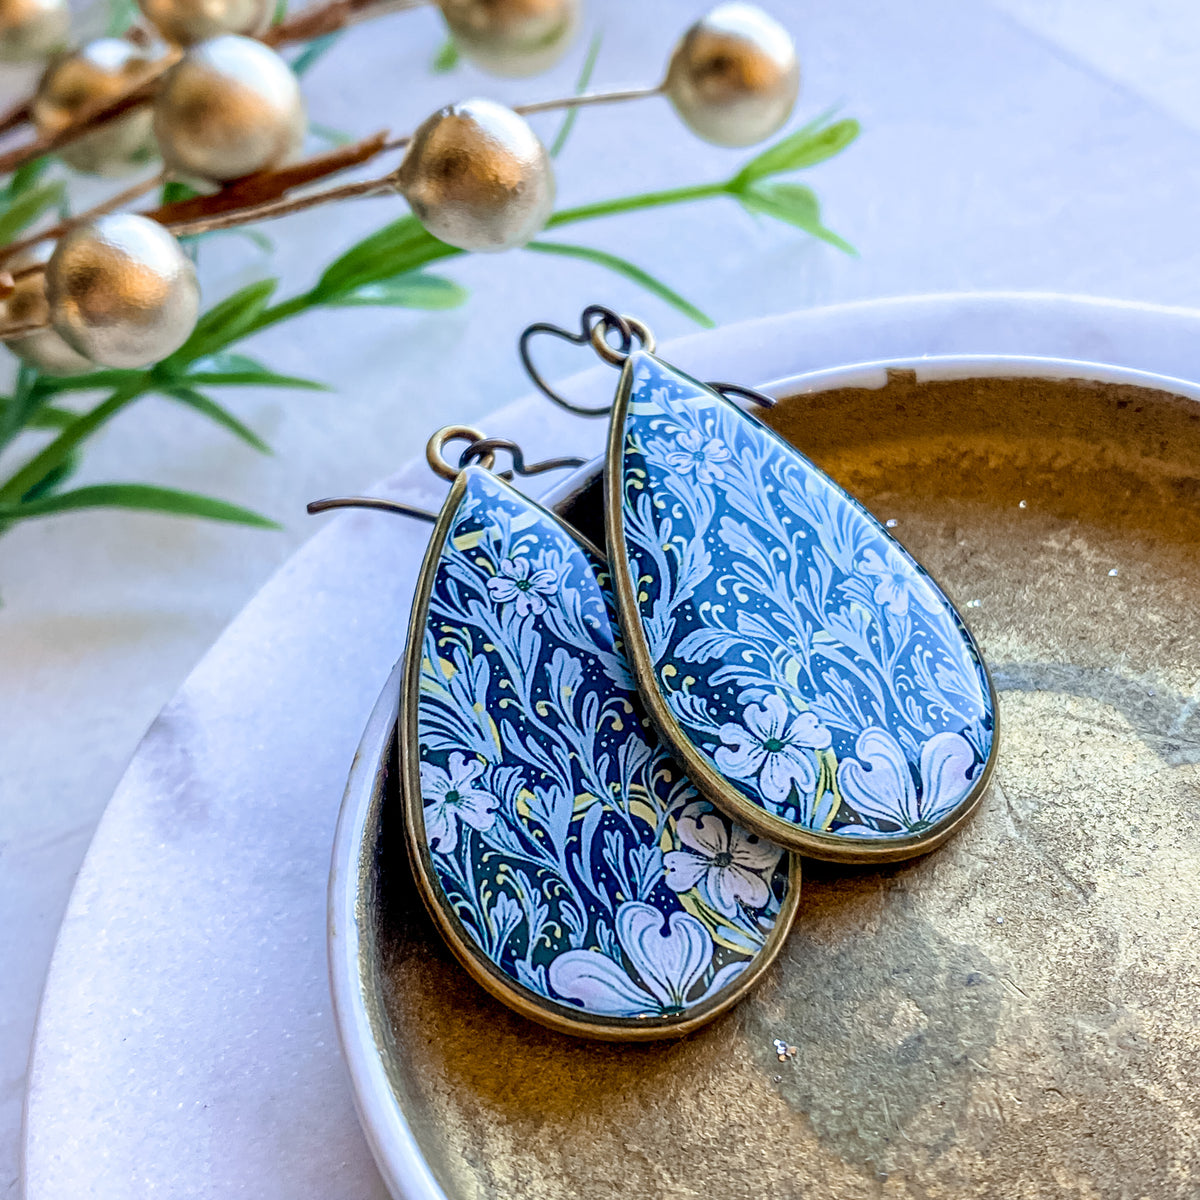 a pair of blue and white earrings sitting on top of a plate